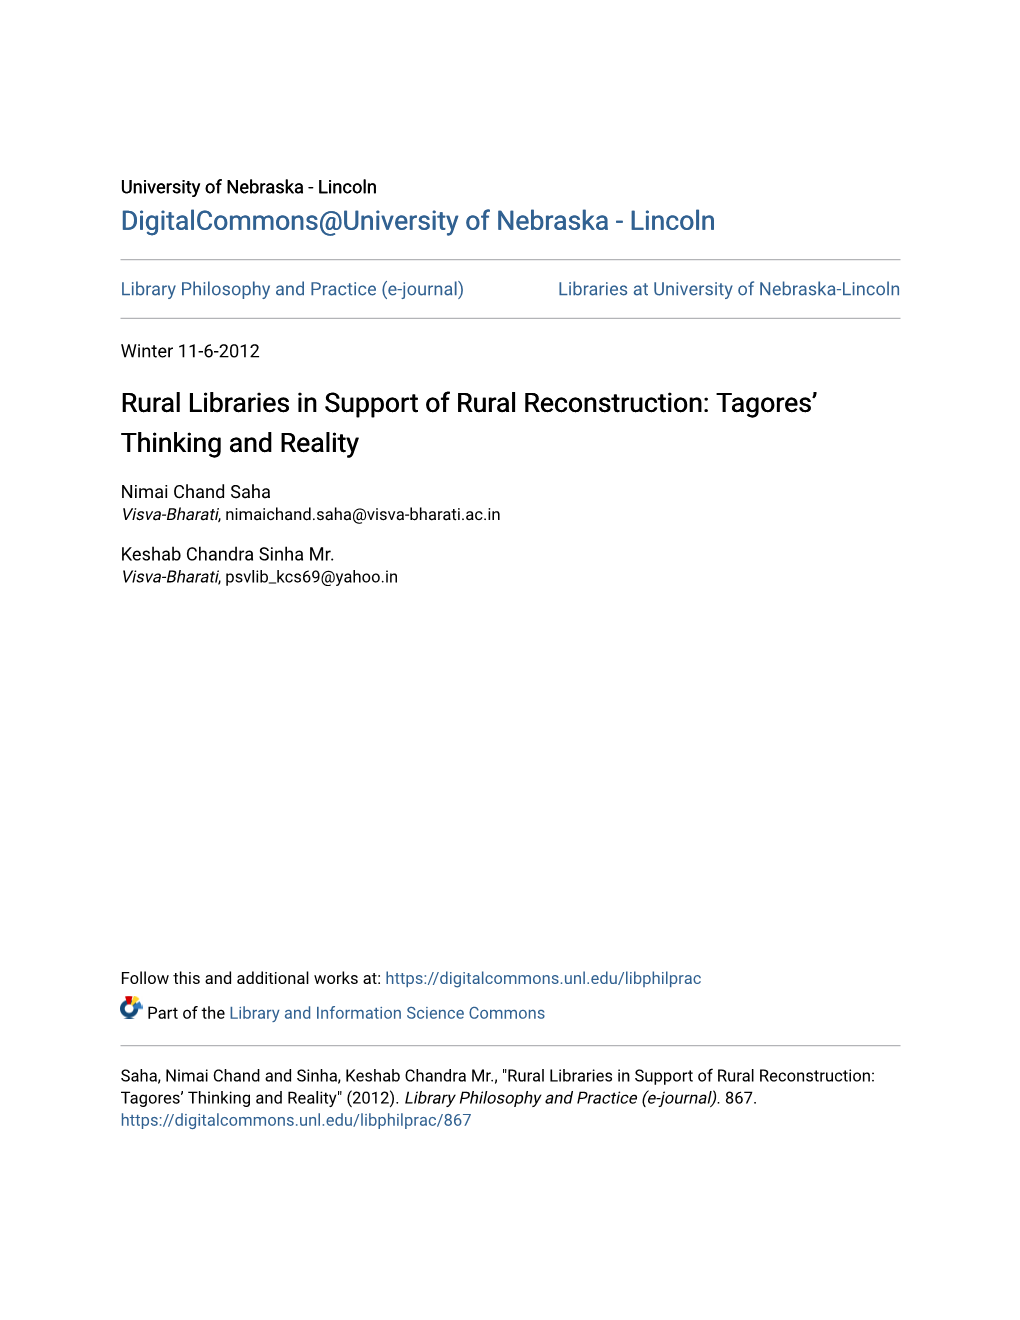 Rural Libraries in Support of Rural Reconstruction: Tagores’ Thinking and Reality